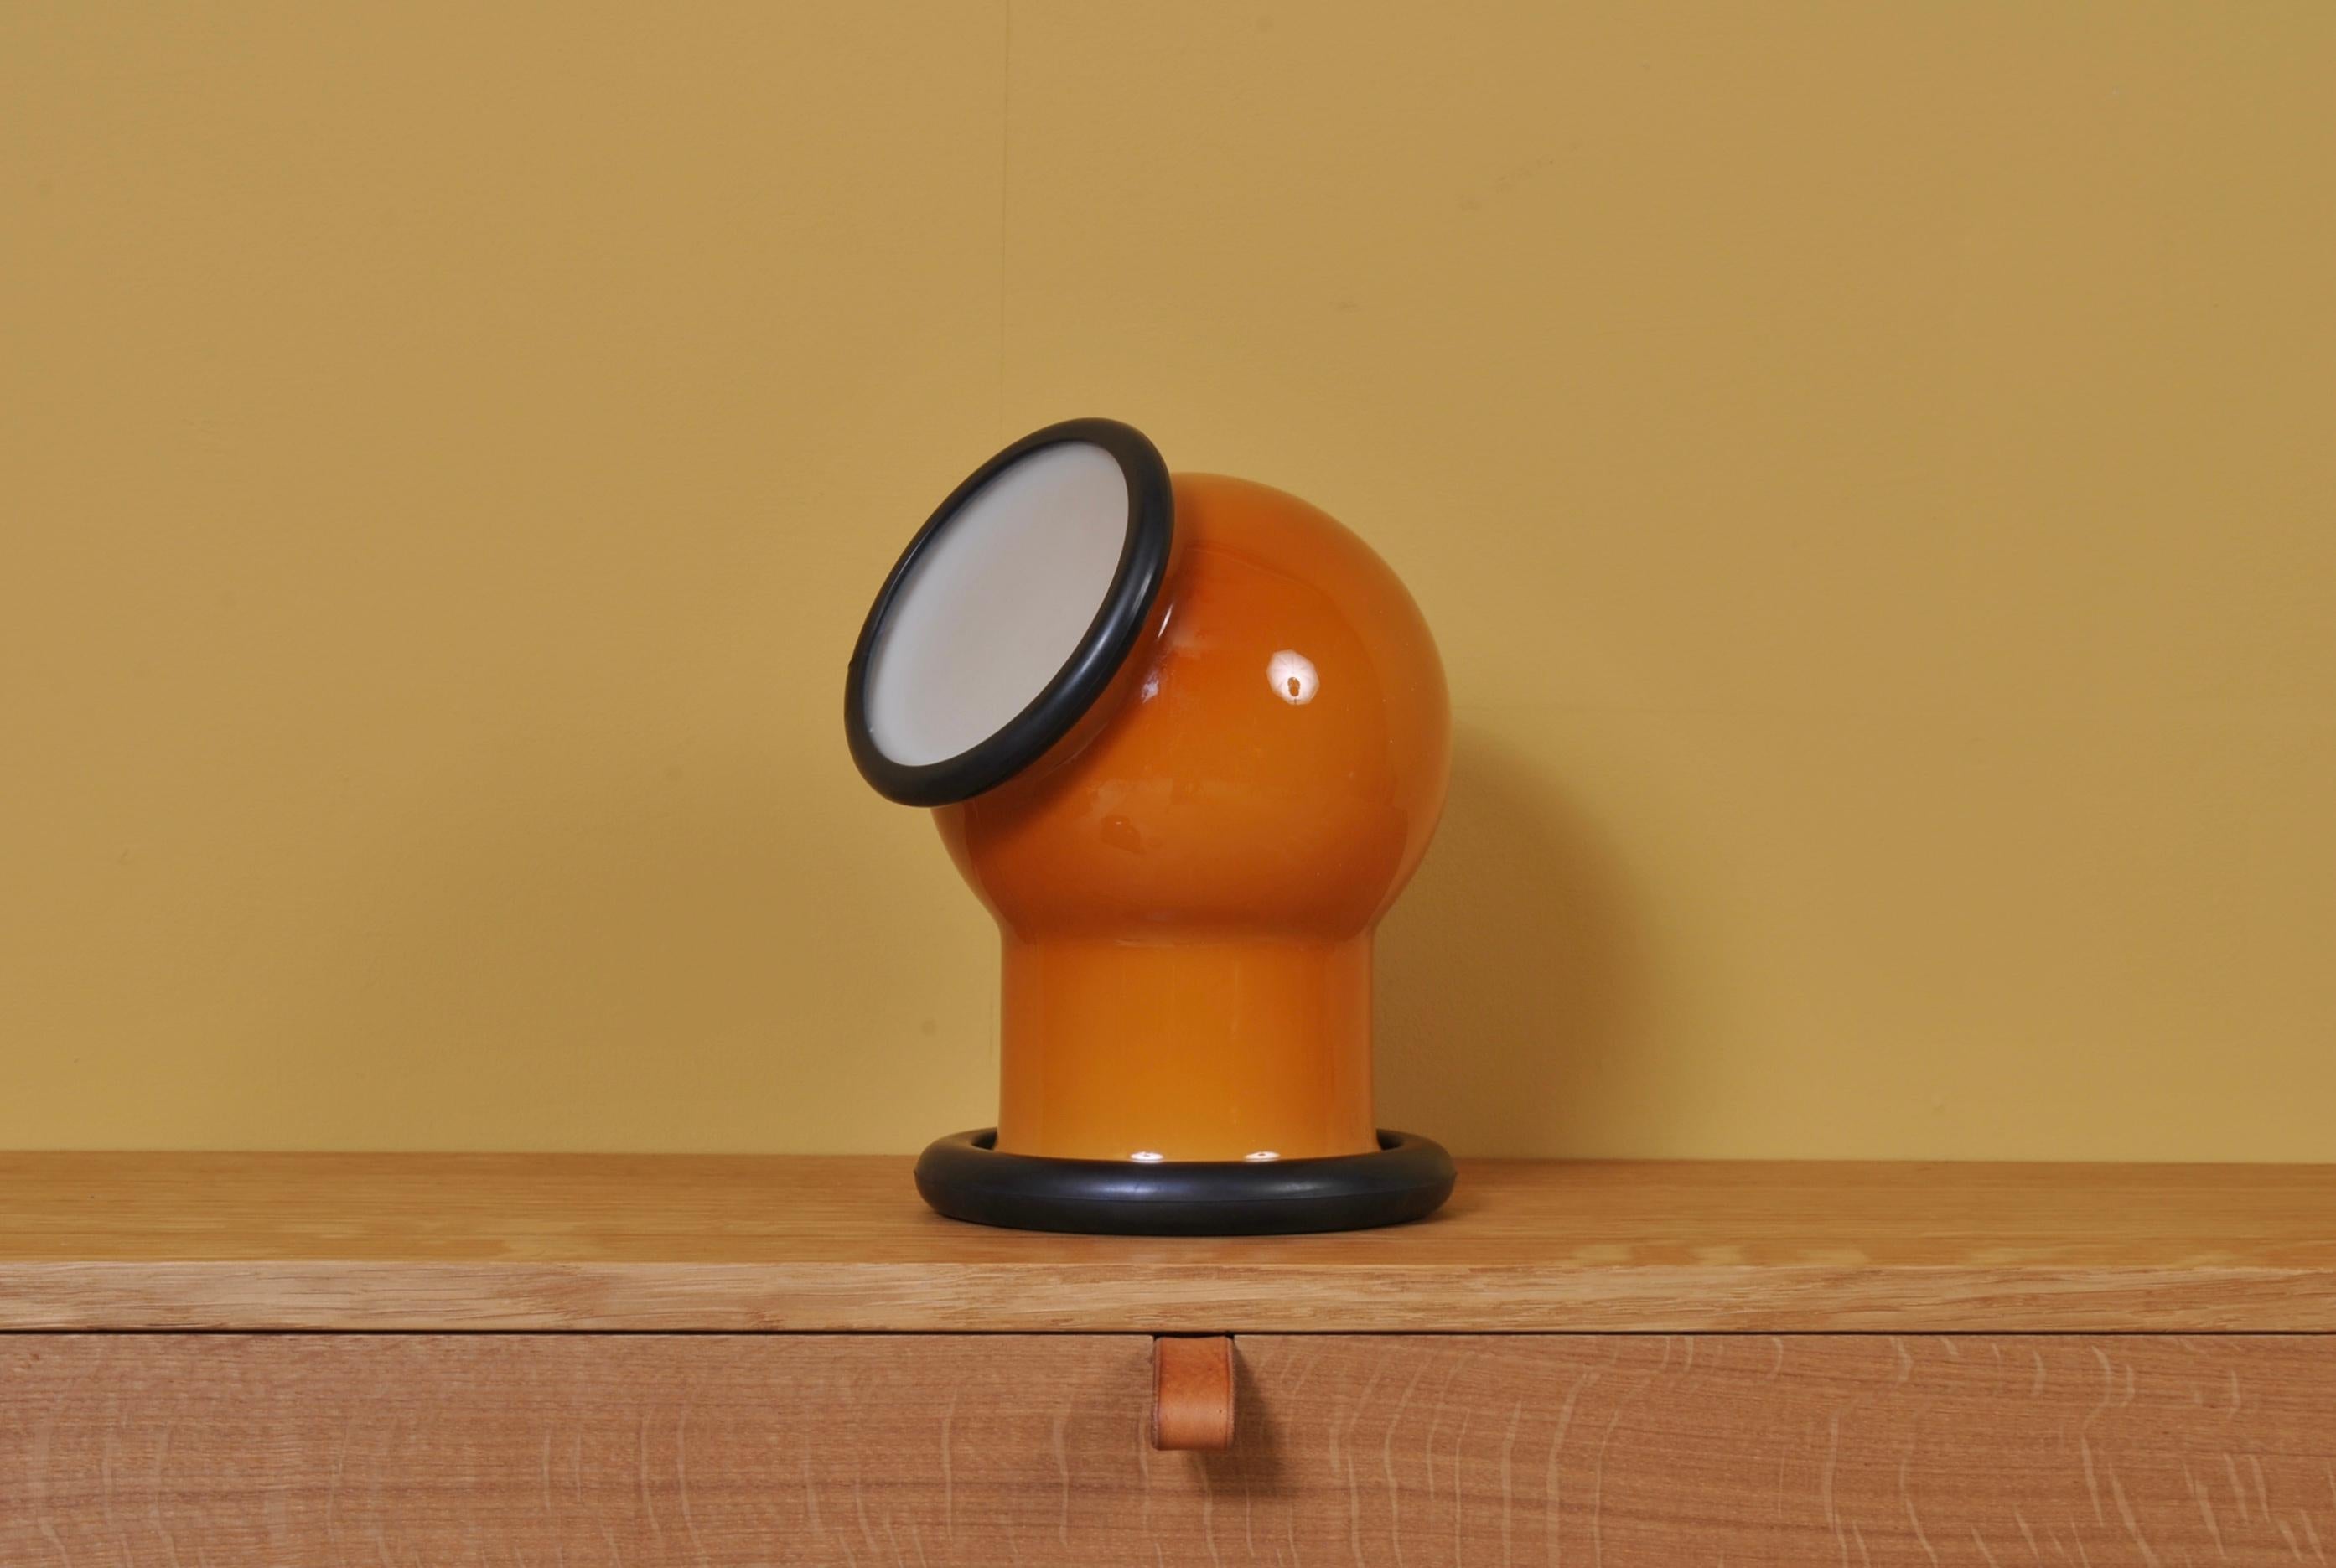 A wonderful midcentury Holmegaard glass Epoke lamp. Designed by Michael Bang for Holmegaard, Denmark, 1972. A playful and characterful design with a slightly nautical nature. Orange main case with white cap. Heavy glass with rubber rim.
Multipurpose